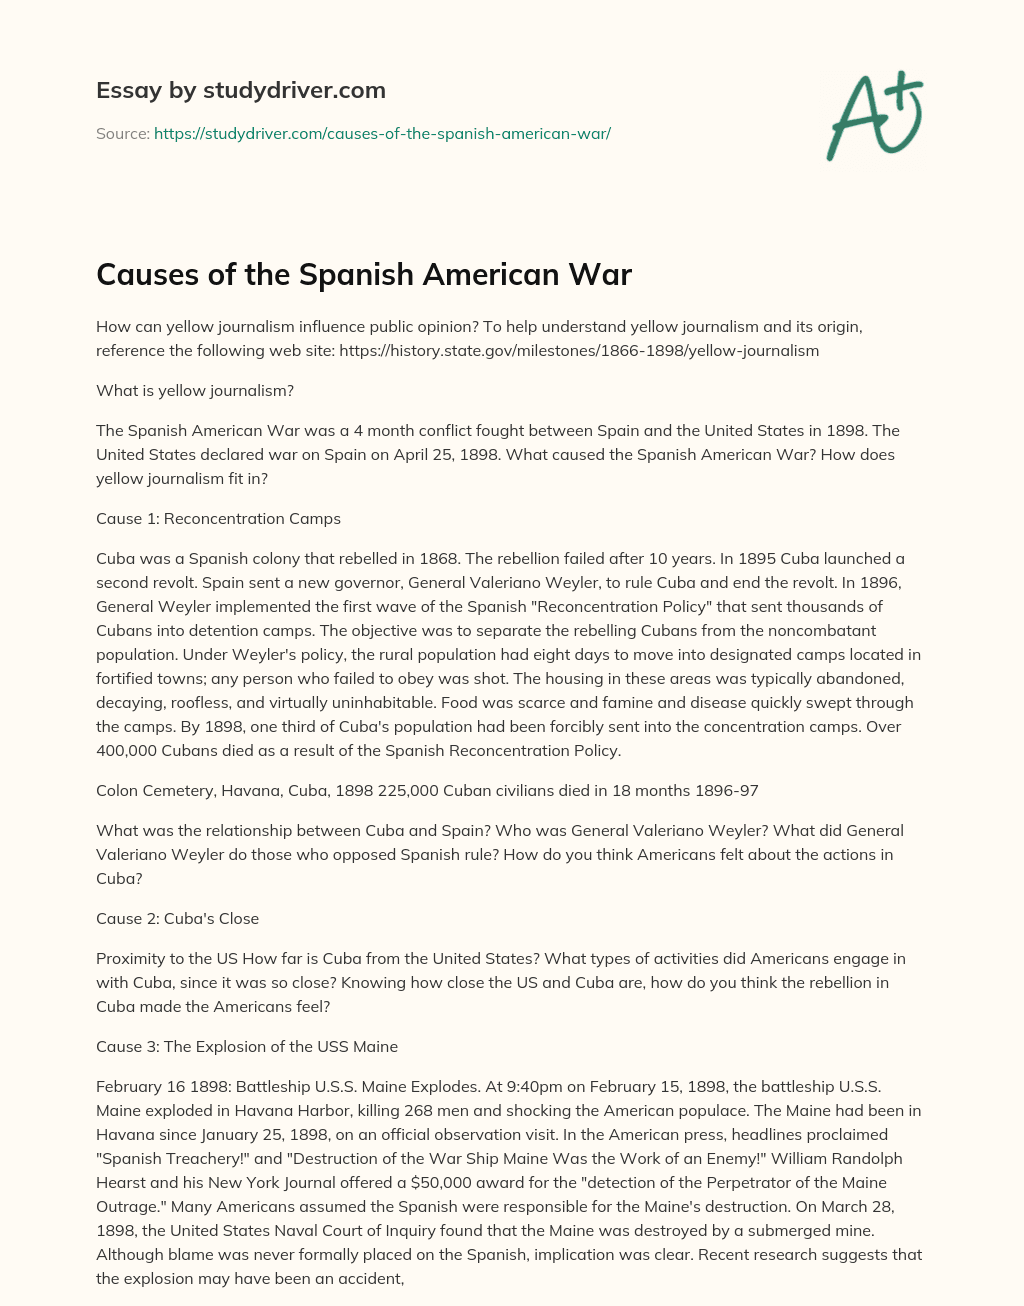 Causes of the Spanish American War essay